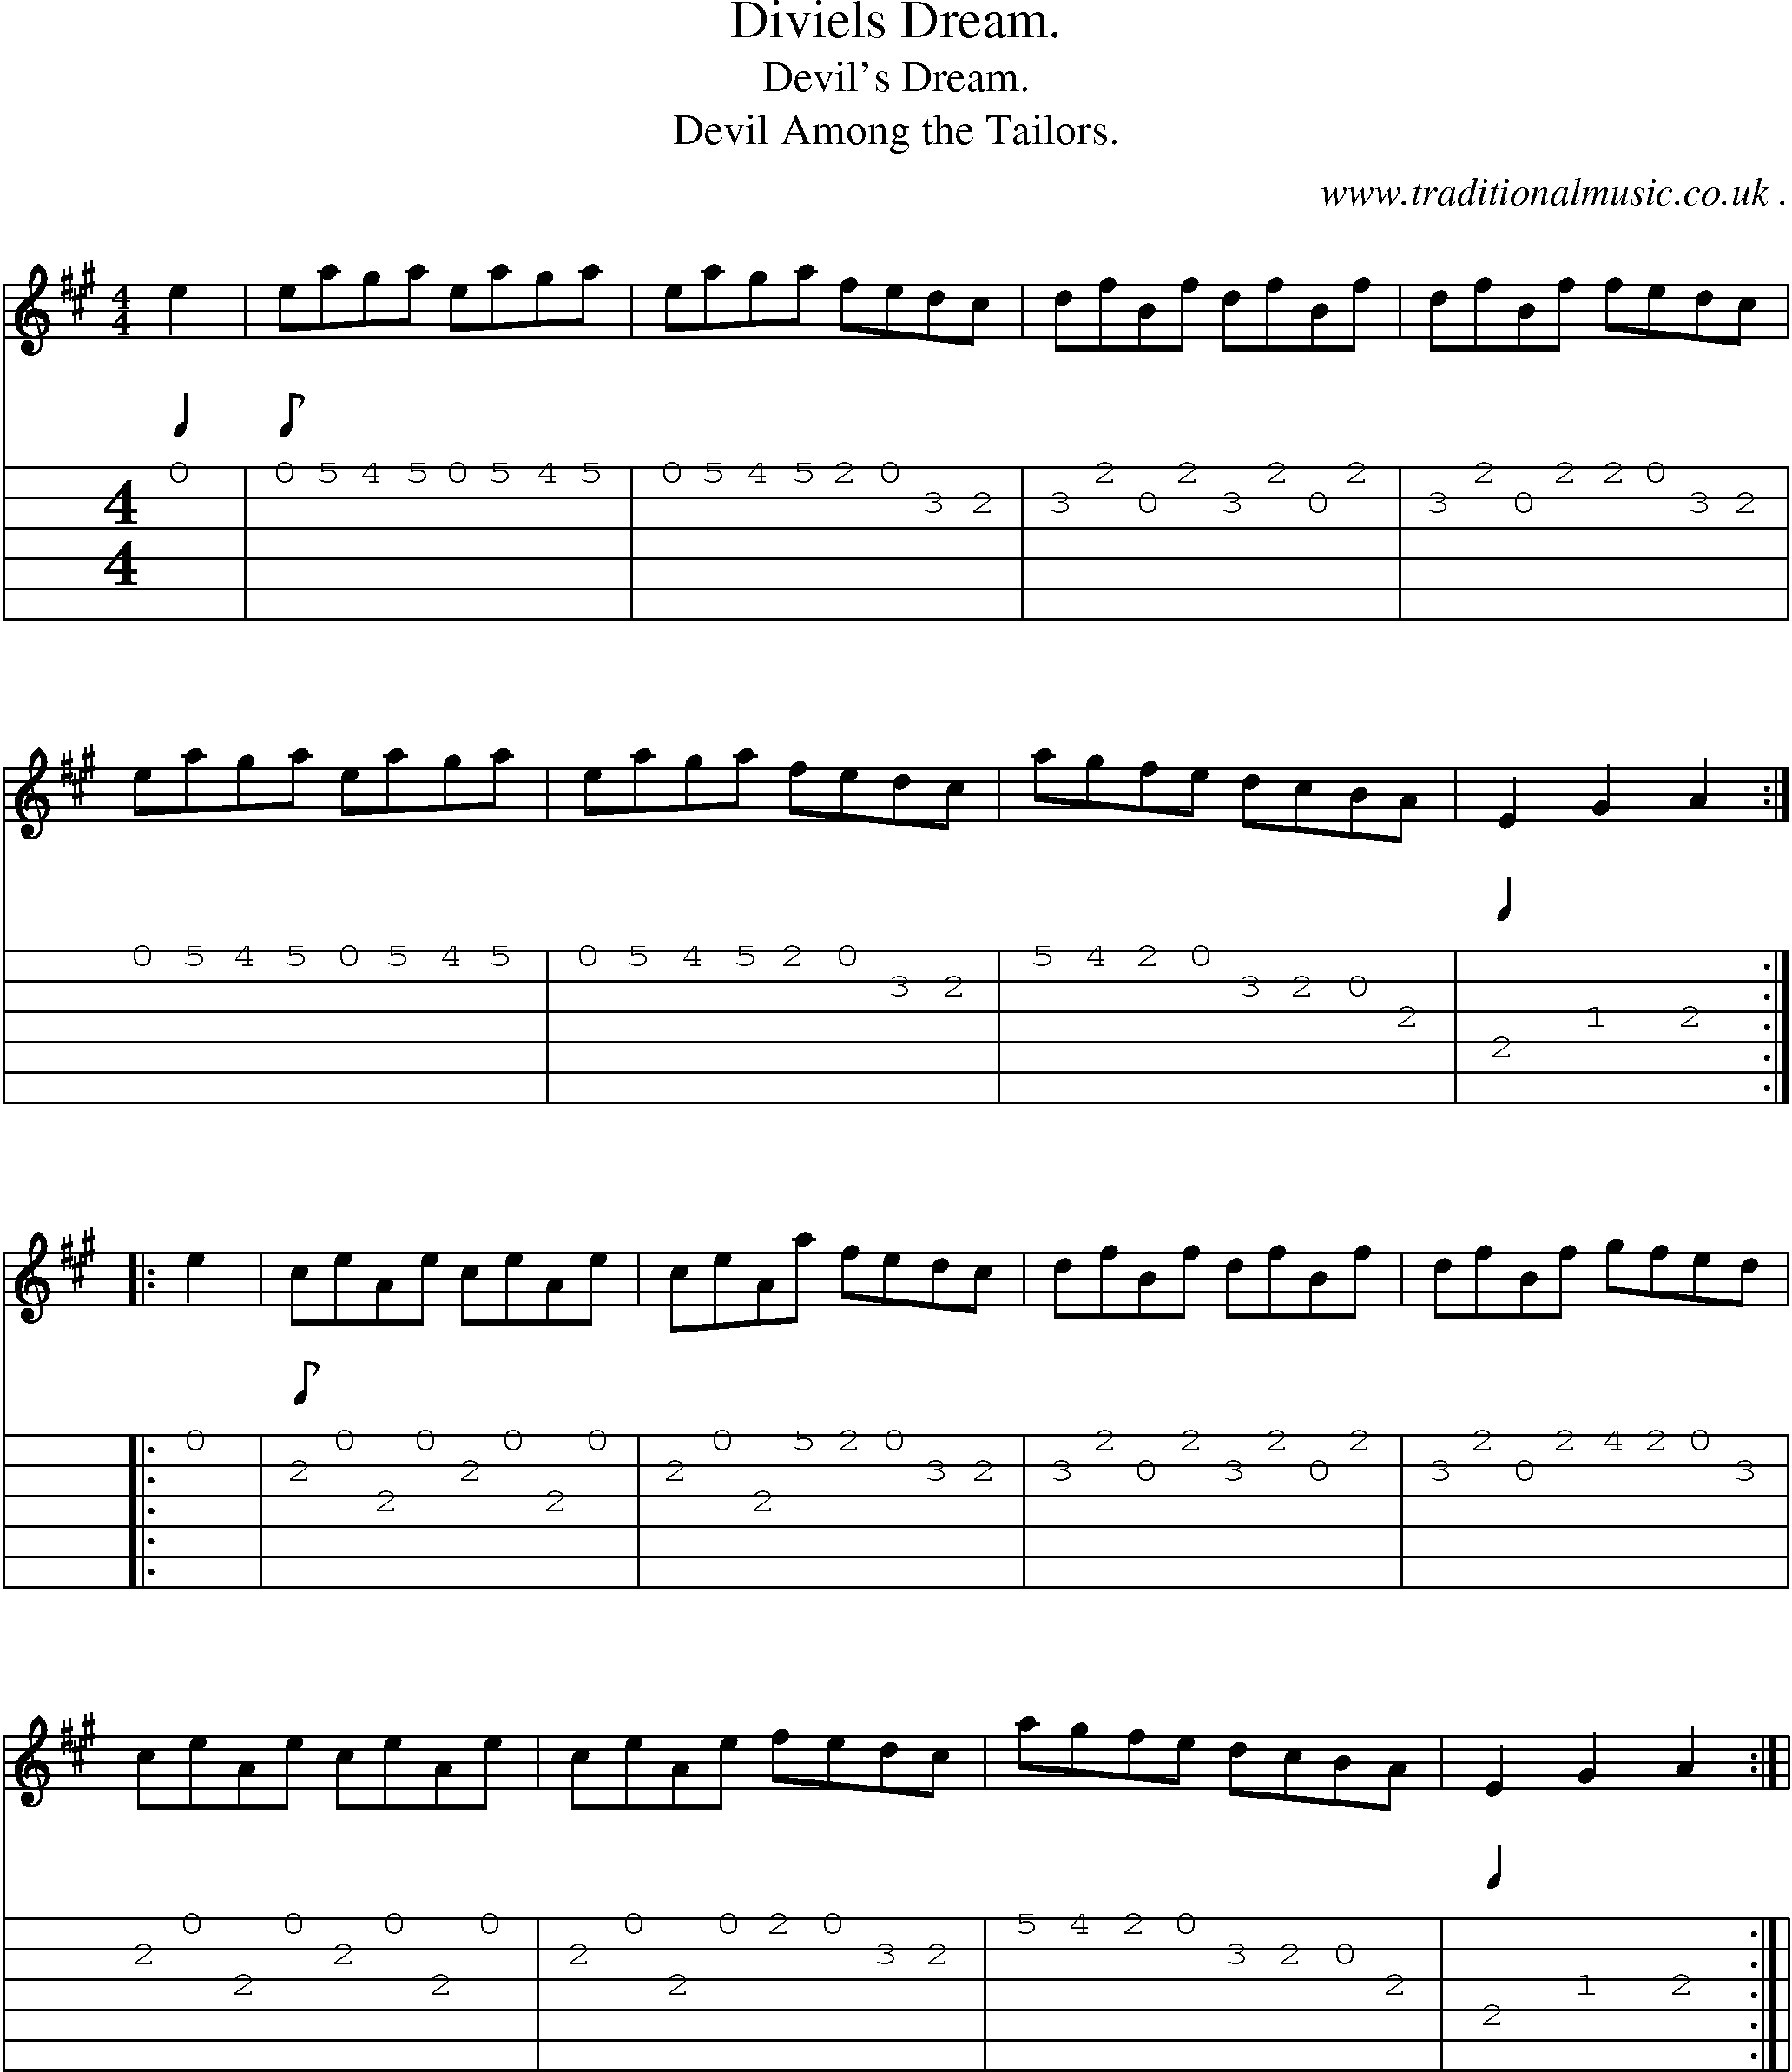 Sheet-Music and Guitar Tabs for Diviels Dream